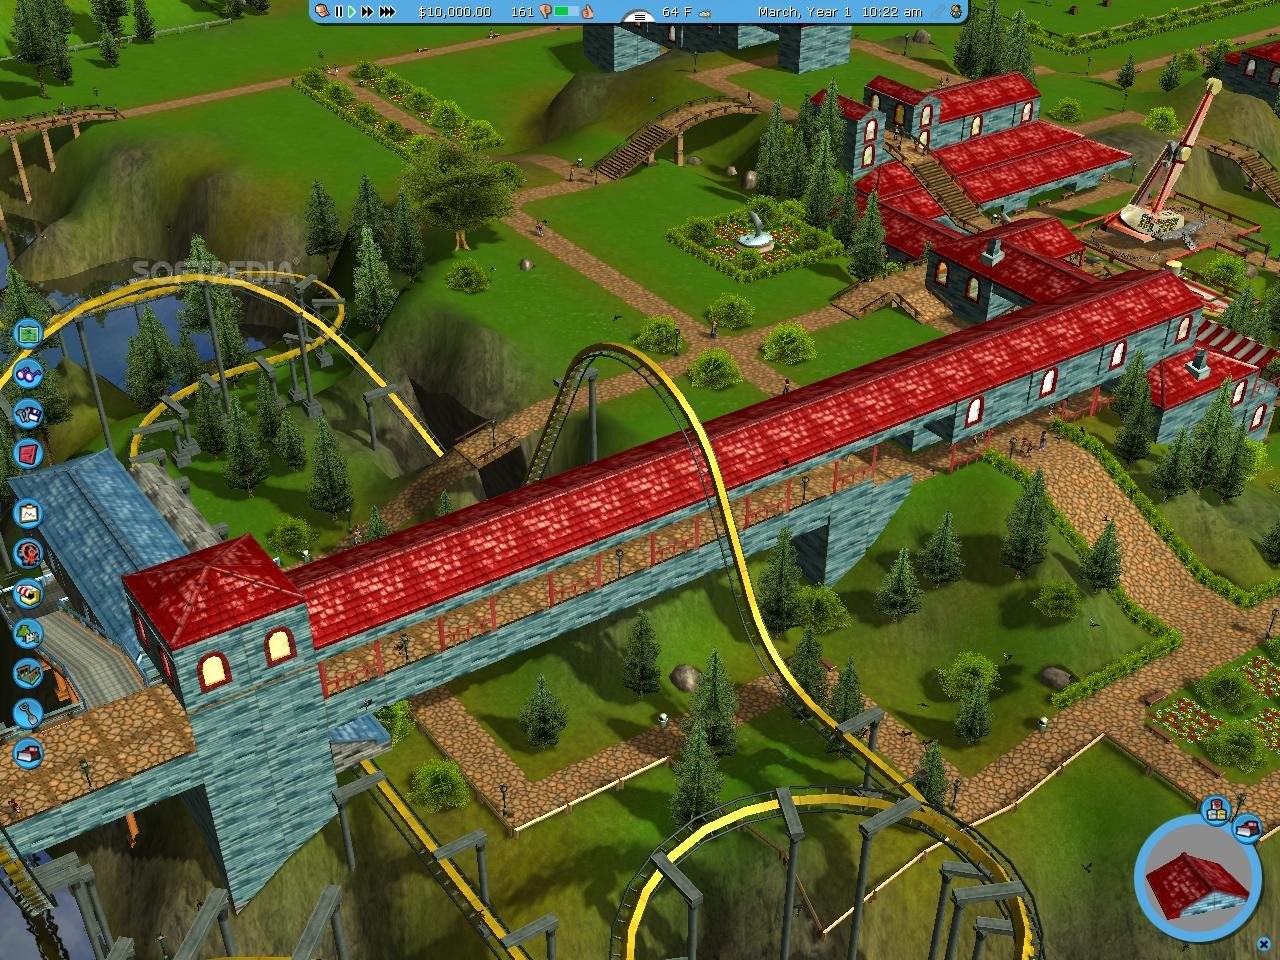 how to torrent roller coaster tycoon 3 on mac